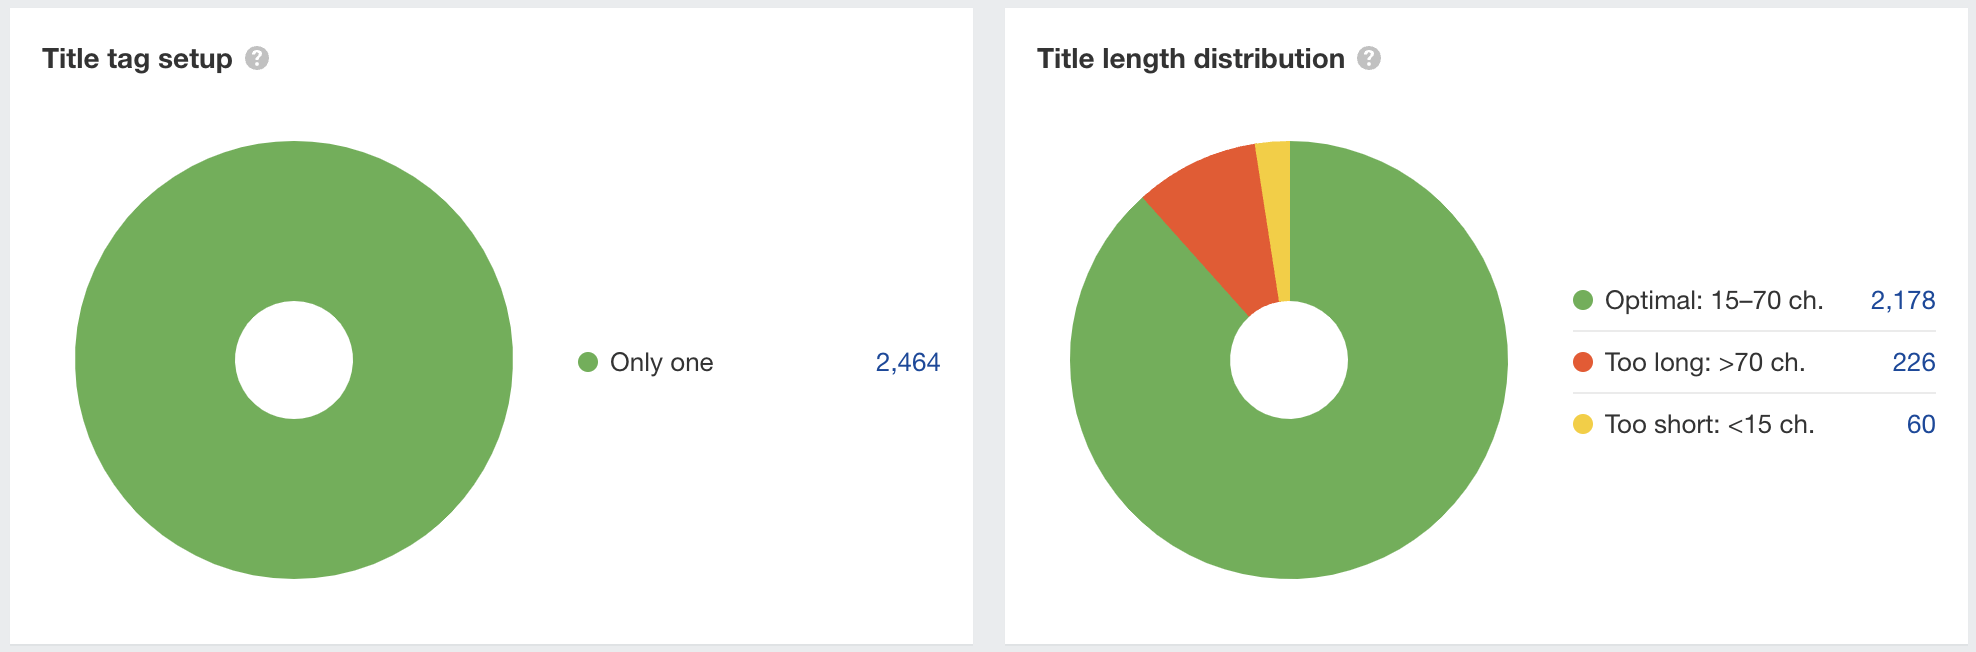 Checking for title tag issues in Ahrefs' Site Audit